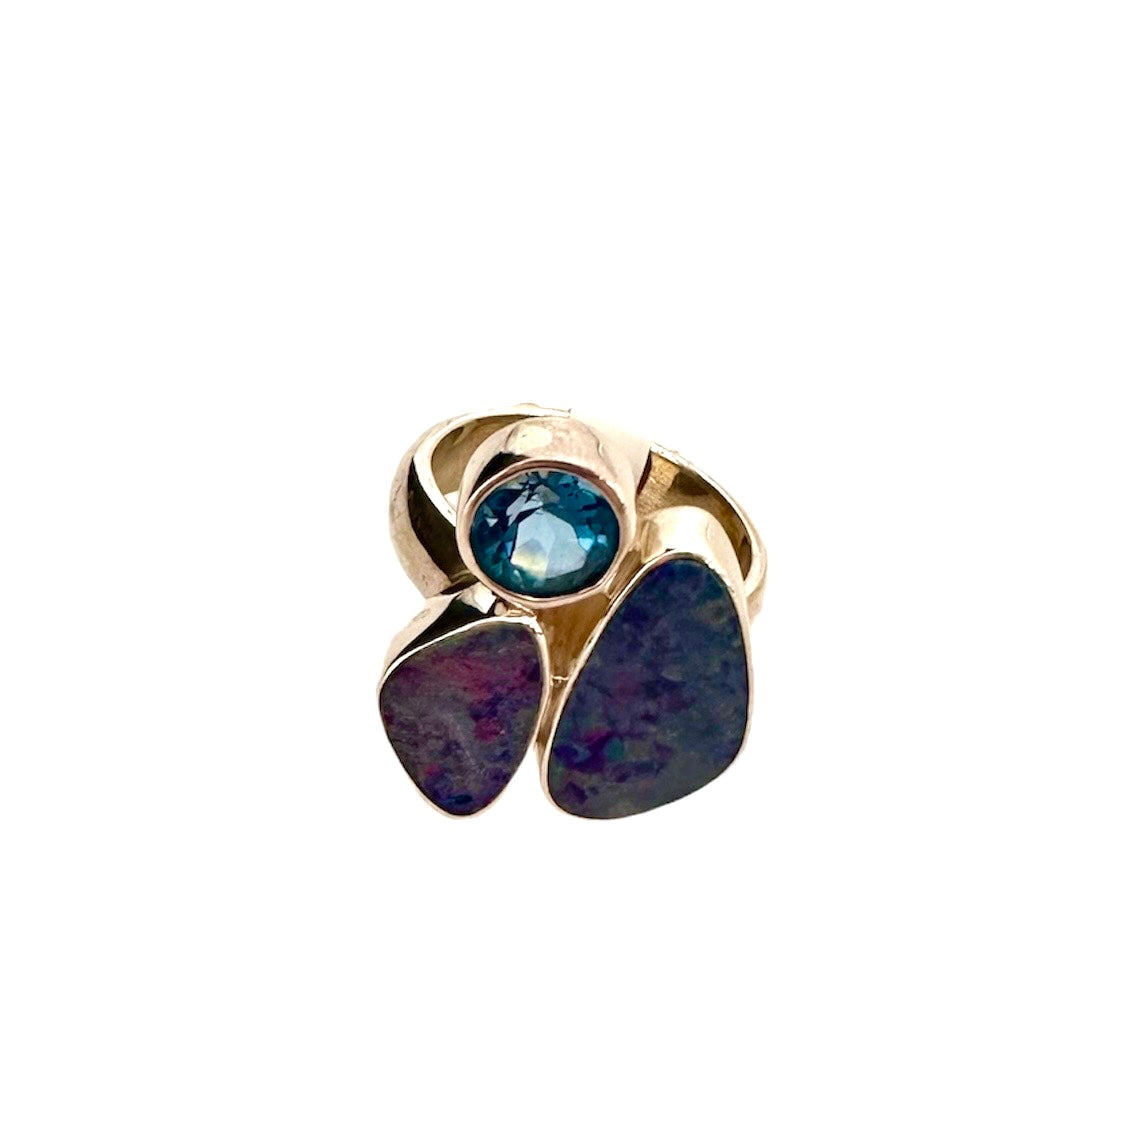 FREEFORM OPAL AND BLUE TOPAZ RING SIZE 6